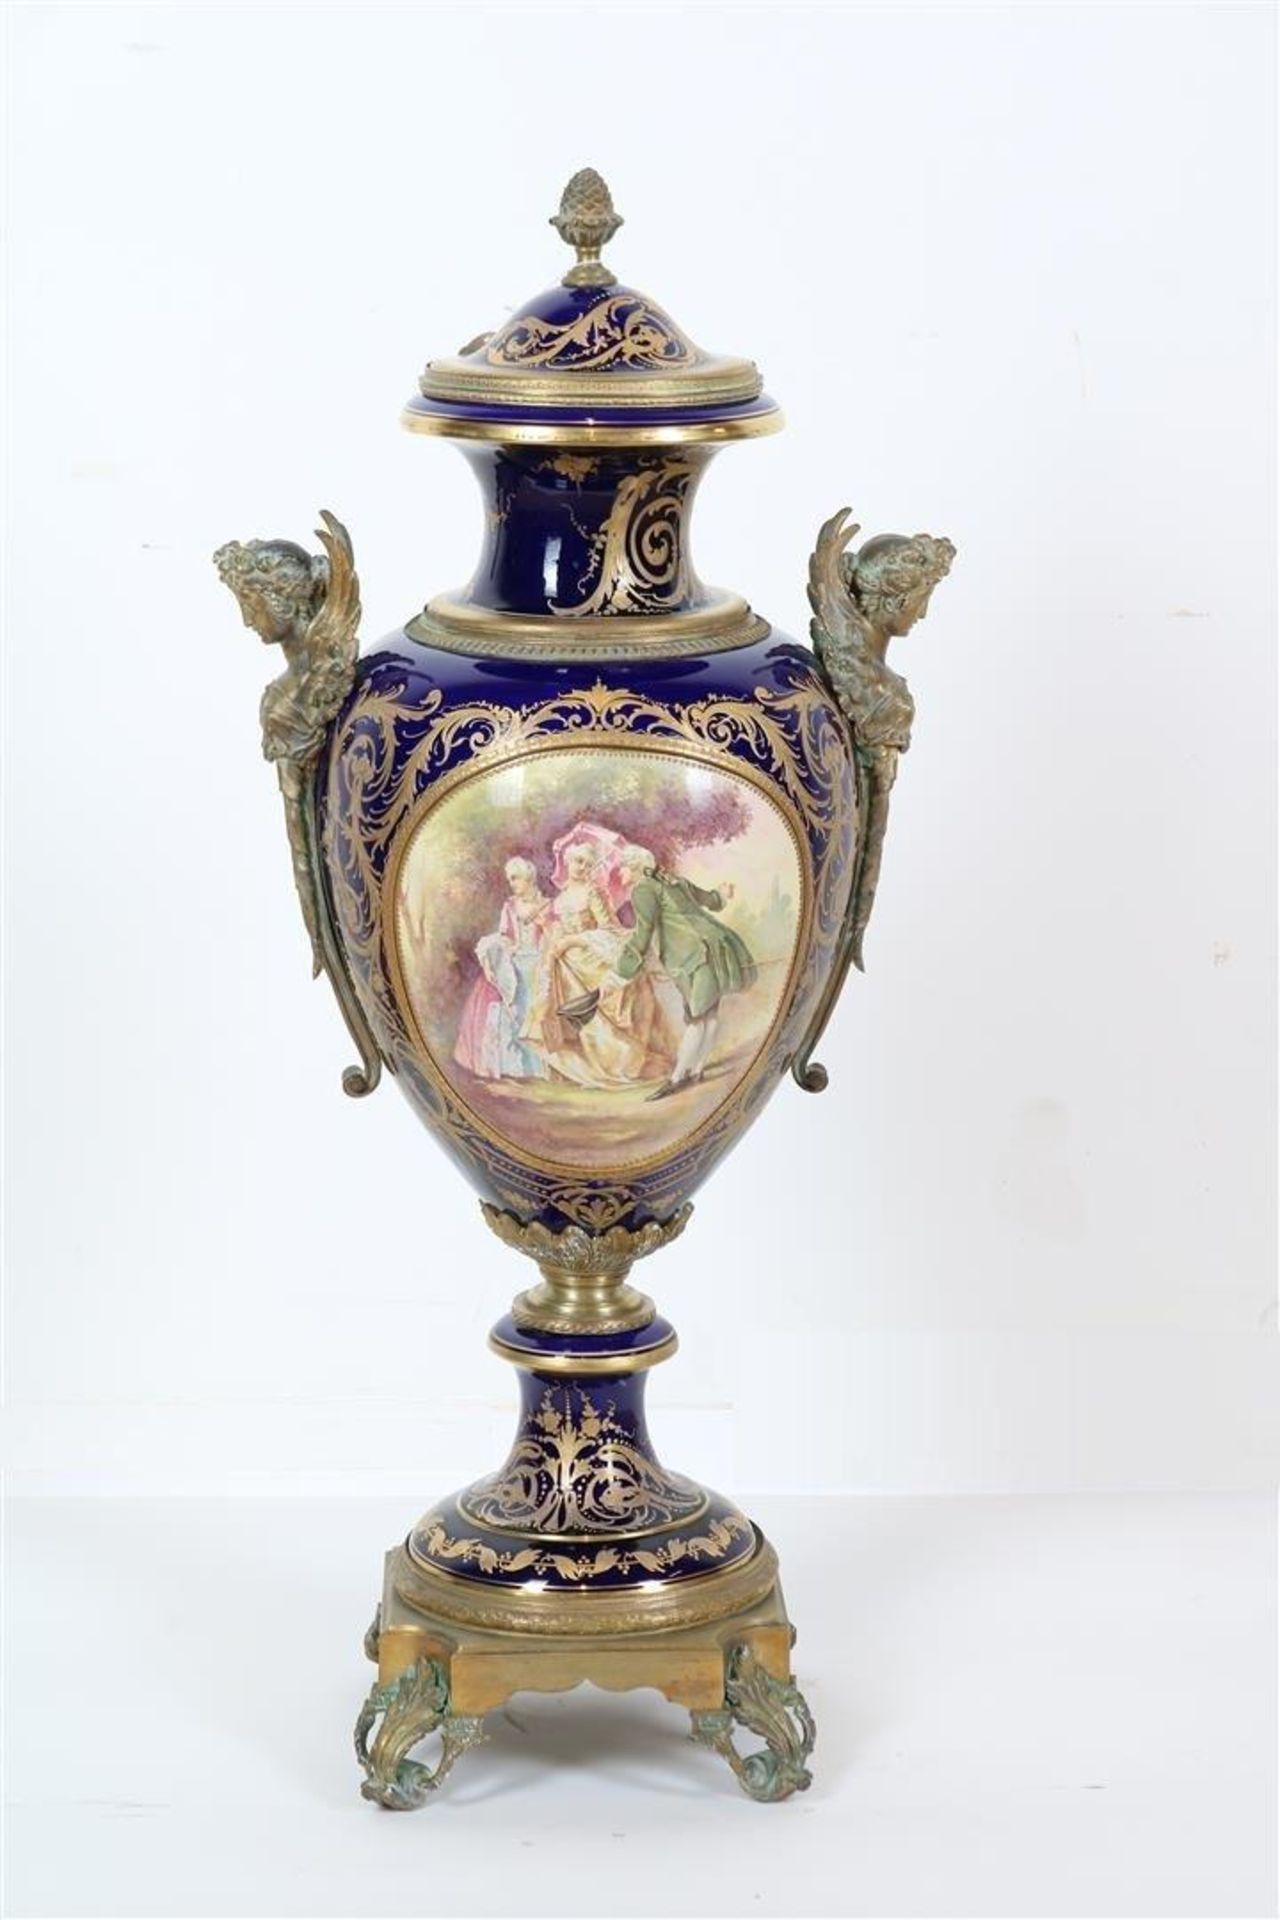 Porcelain Sevres urn vase with fixed lid, double painted decor of romantic scene of figures in